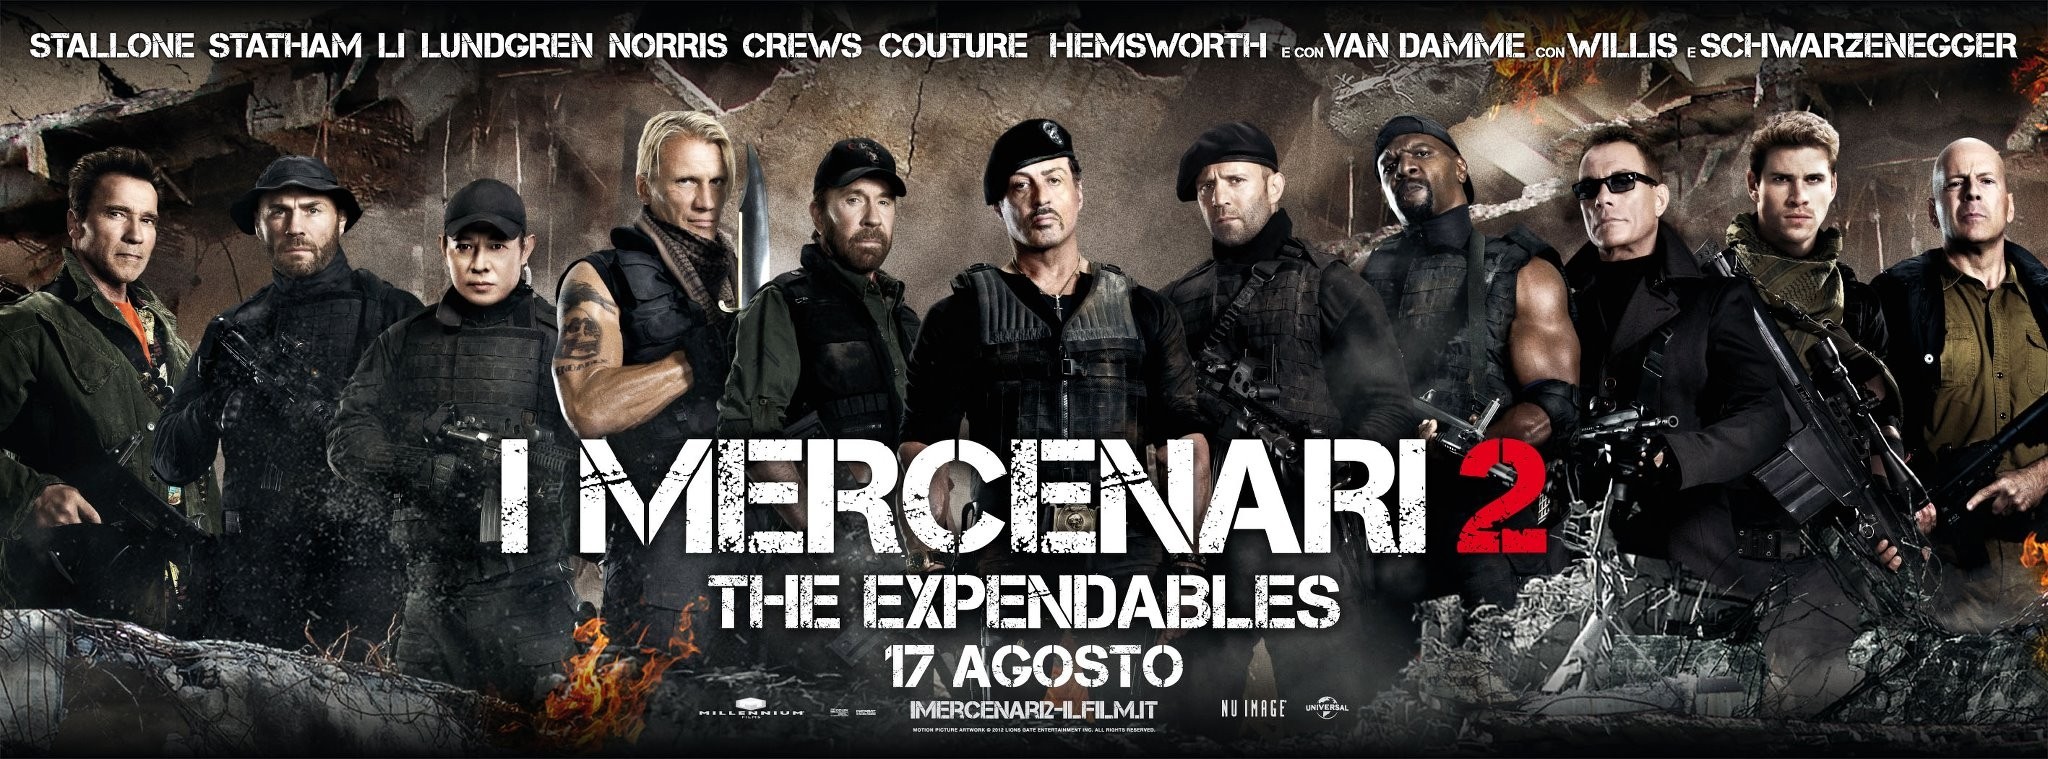 Mega Sized Movie Poster Image for The Expendables 2 (#19 of 21)